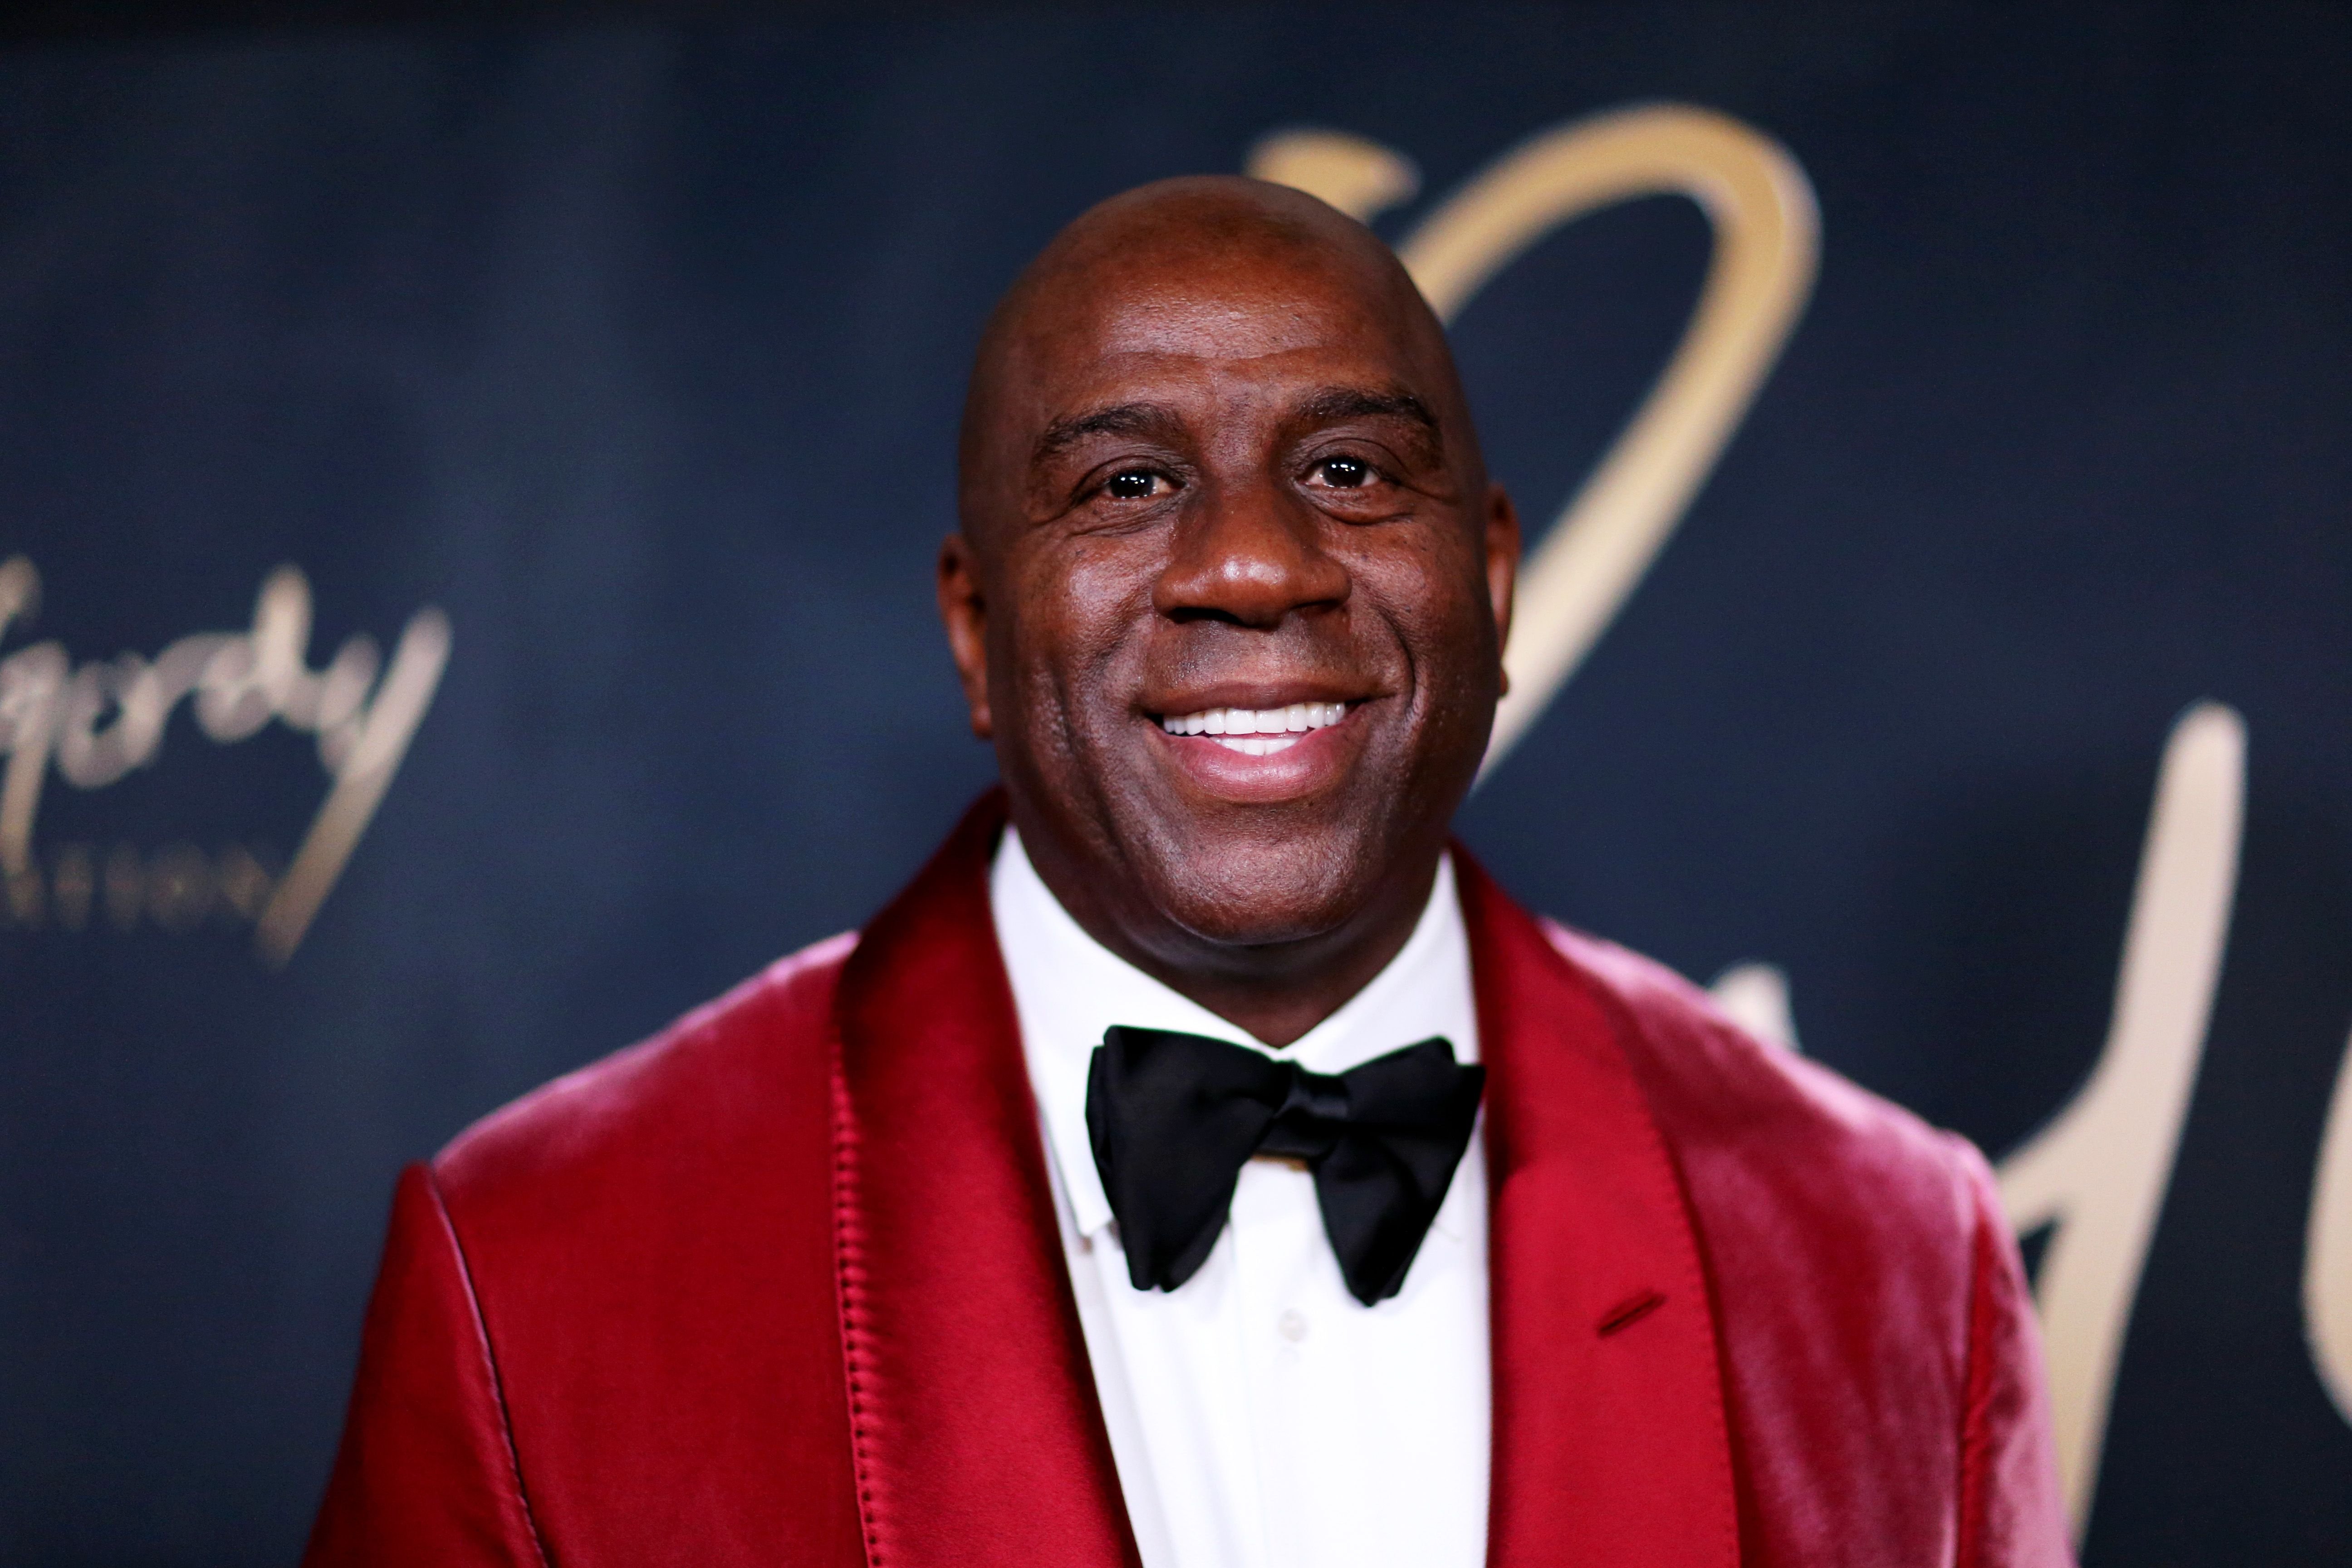 Earvin "Magic" Johnson at the Ryan Gordy Foundation Celebrates 60 Years Of Mowtown in Beverly Hills on November 11, 2019 in Beverly Hills. │Photo: Getty Images